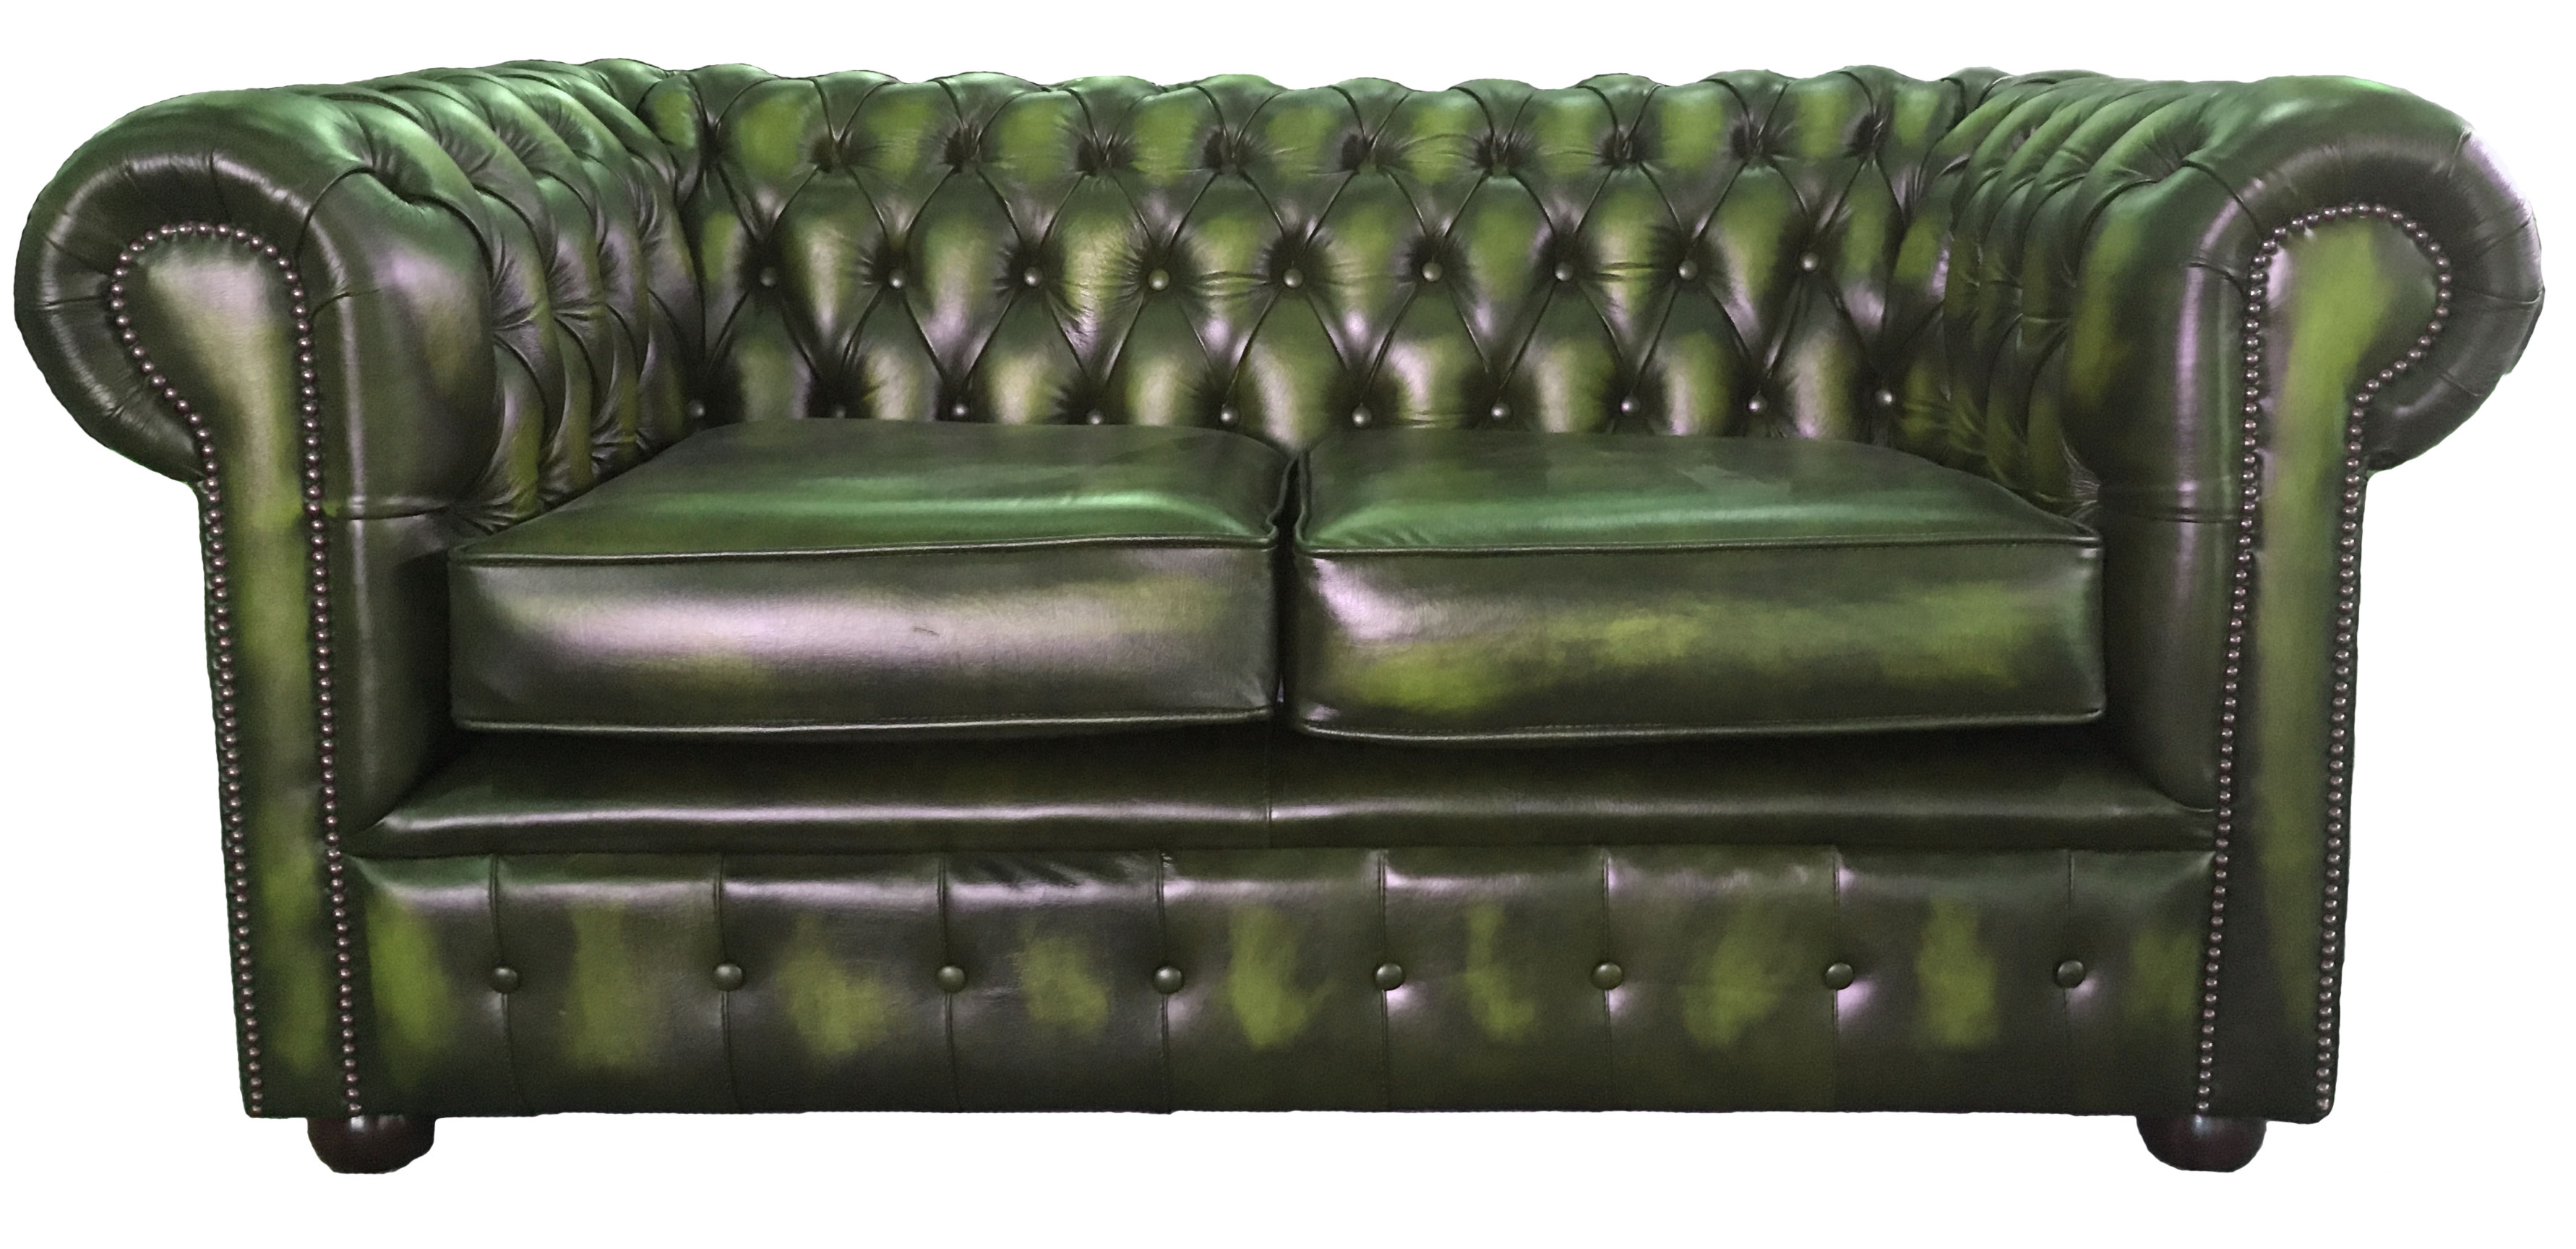 Genuine Leather Chesterfield Three Two Seater Sofa In Antique Green 8438640125128 Ebay